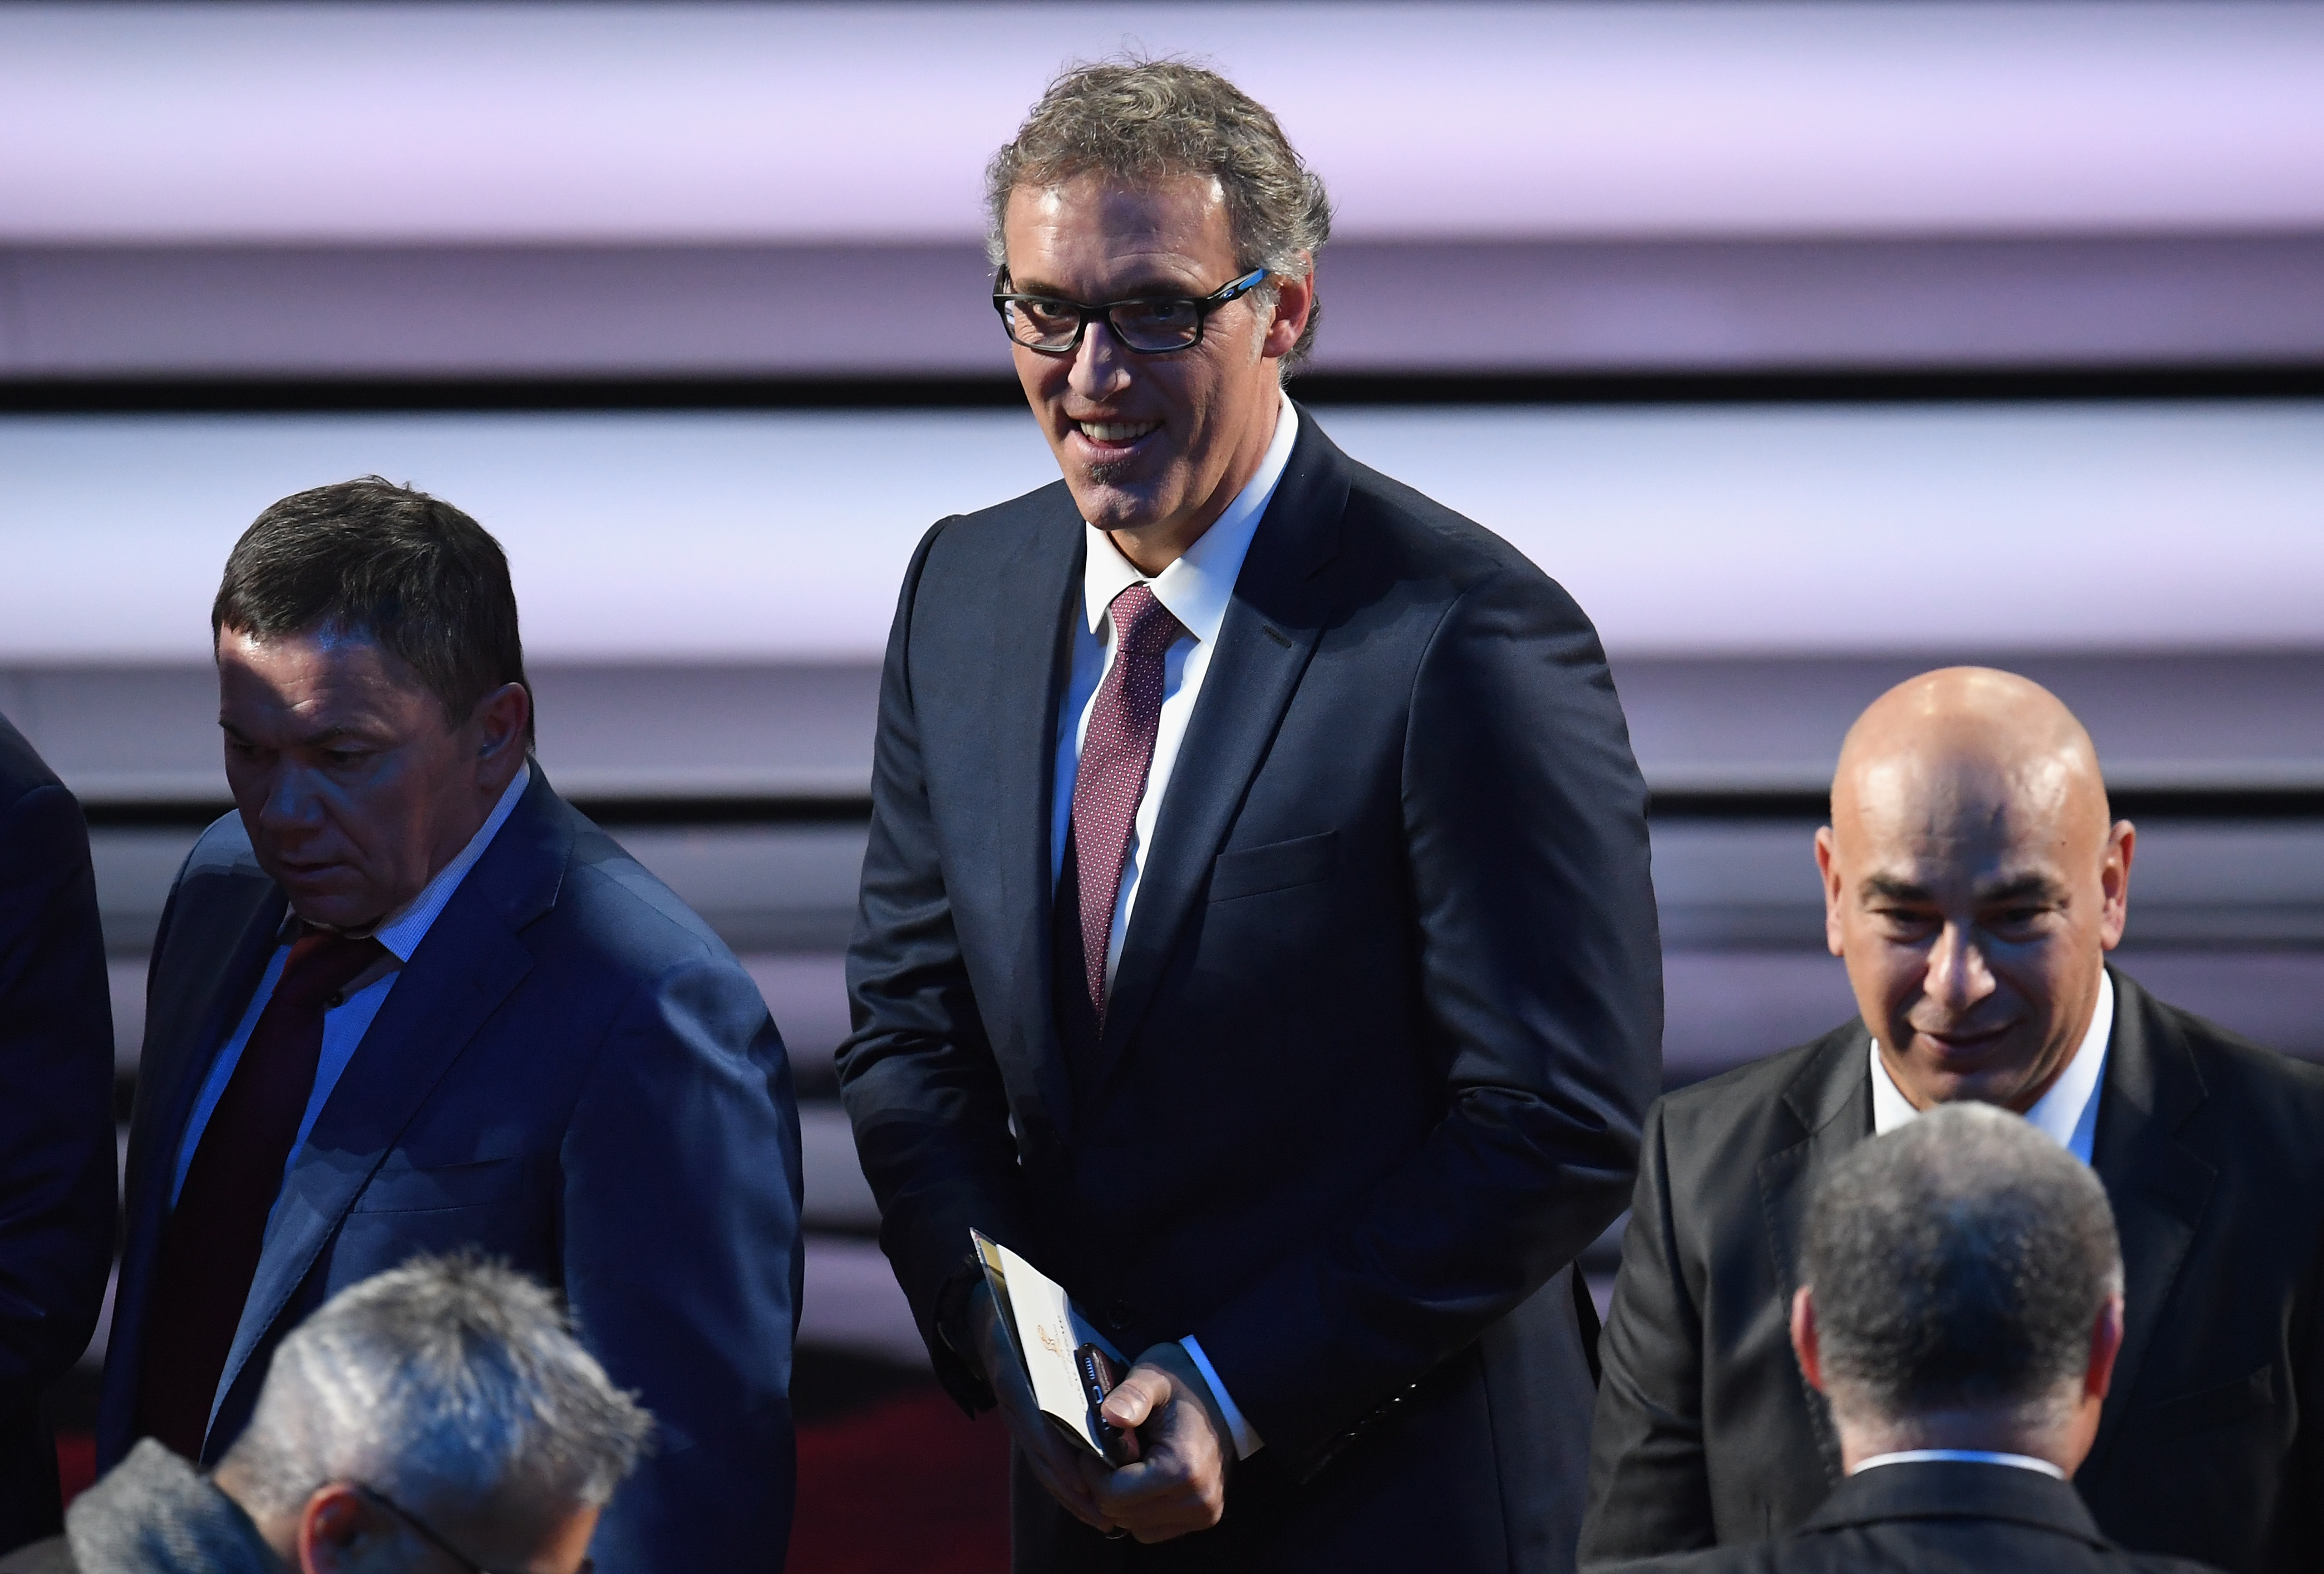 MOSCOW, RUSSIA - DECEMBER 01: Draw assistant, Laurent Blanc looks on during the Final Draw for the 2018 FIFA World Cup Russia at the State Kremlin Palace on December 1, 2017 in Moscow, Russia.  (Photo by Matthias Hangst/Bongarts/Getty Images)